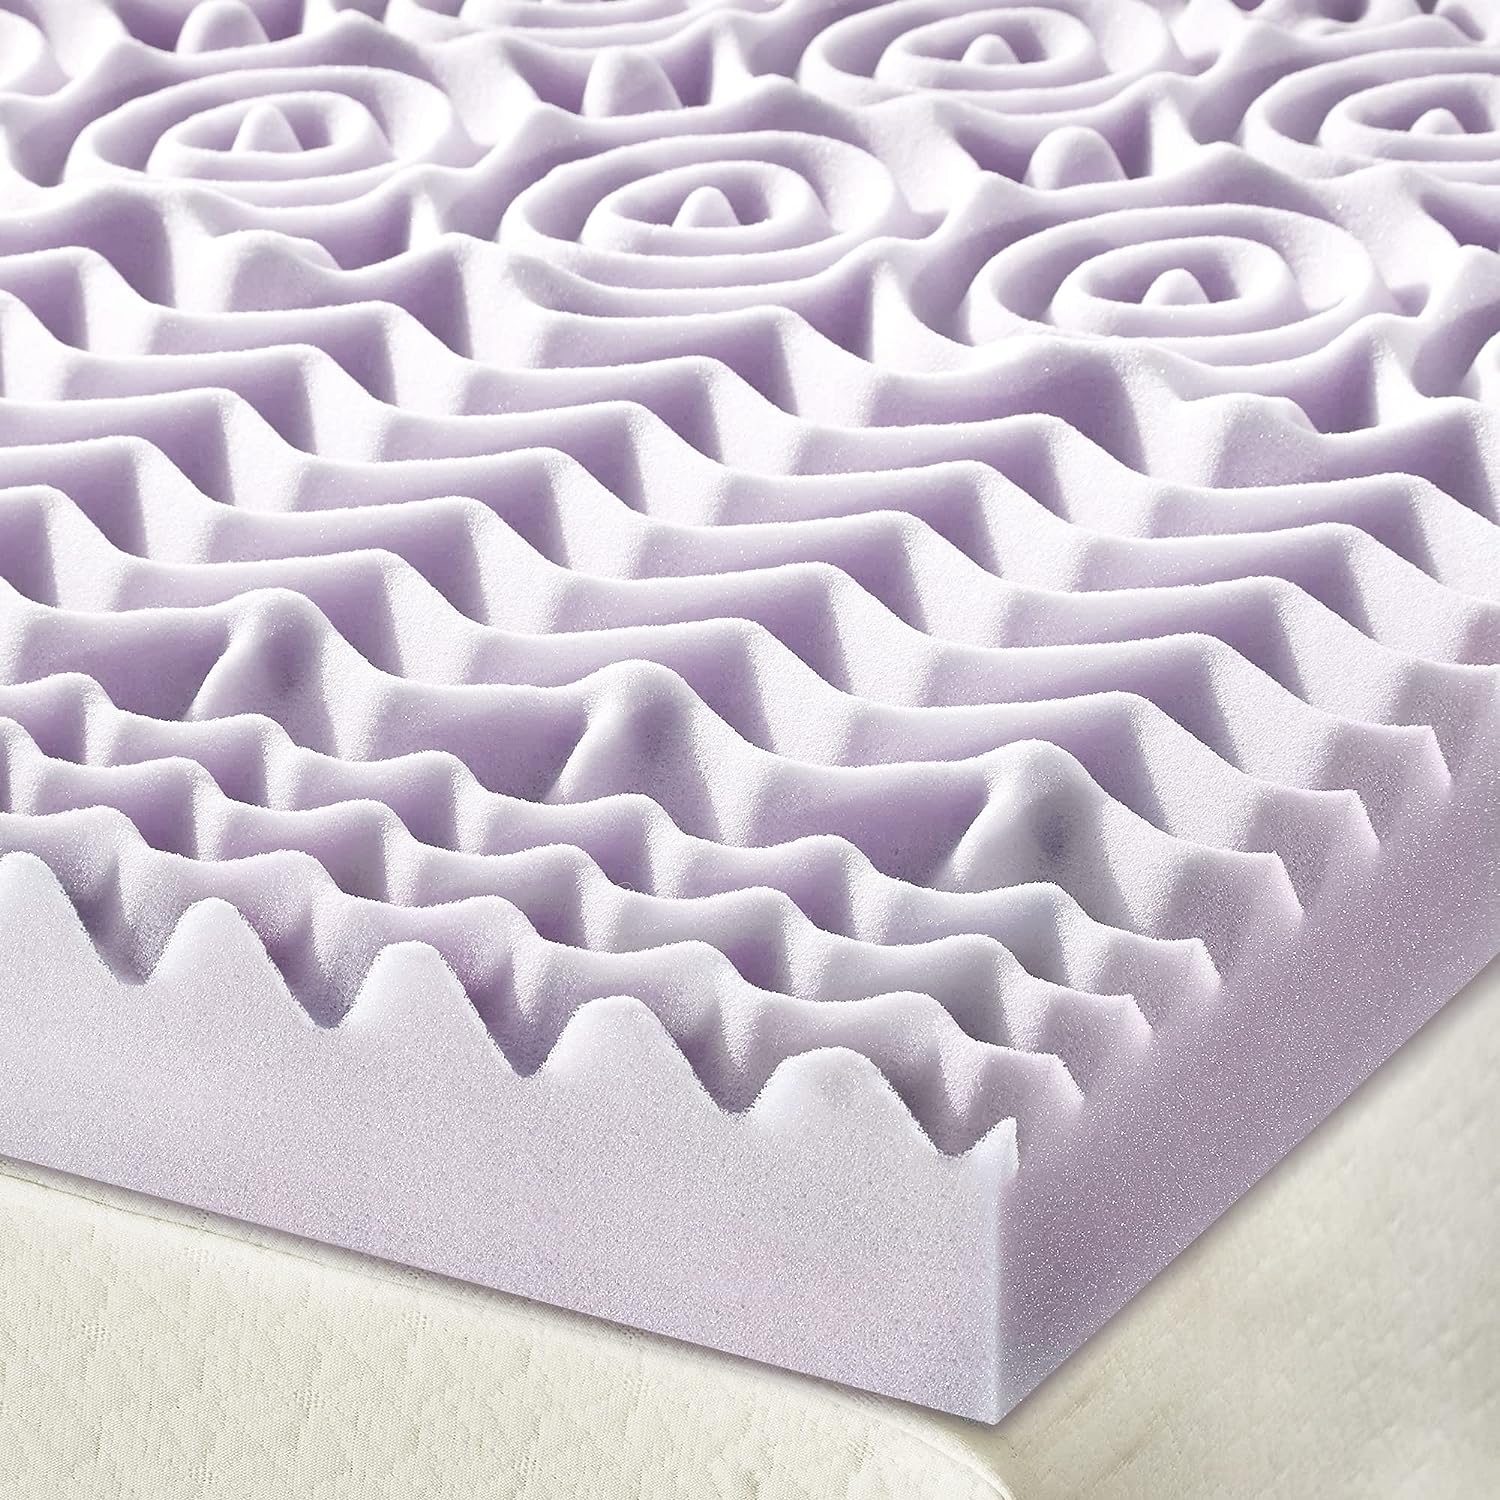 Deco Gear 3-Inch Memory Foam Mattress Topper with Lavender Infused Scent &  Reviews